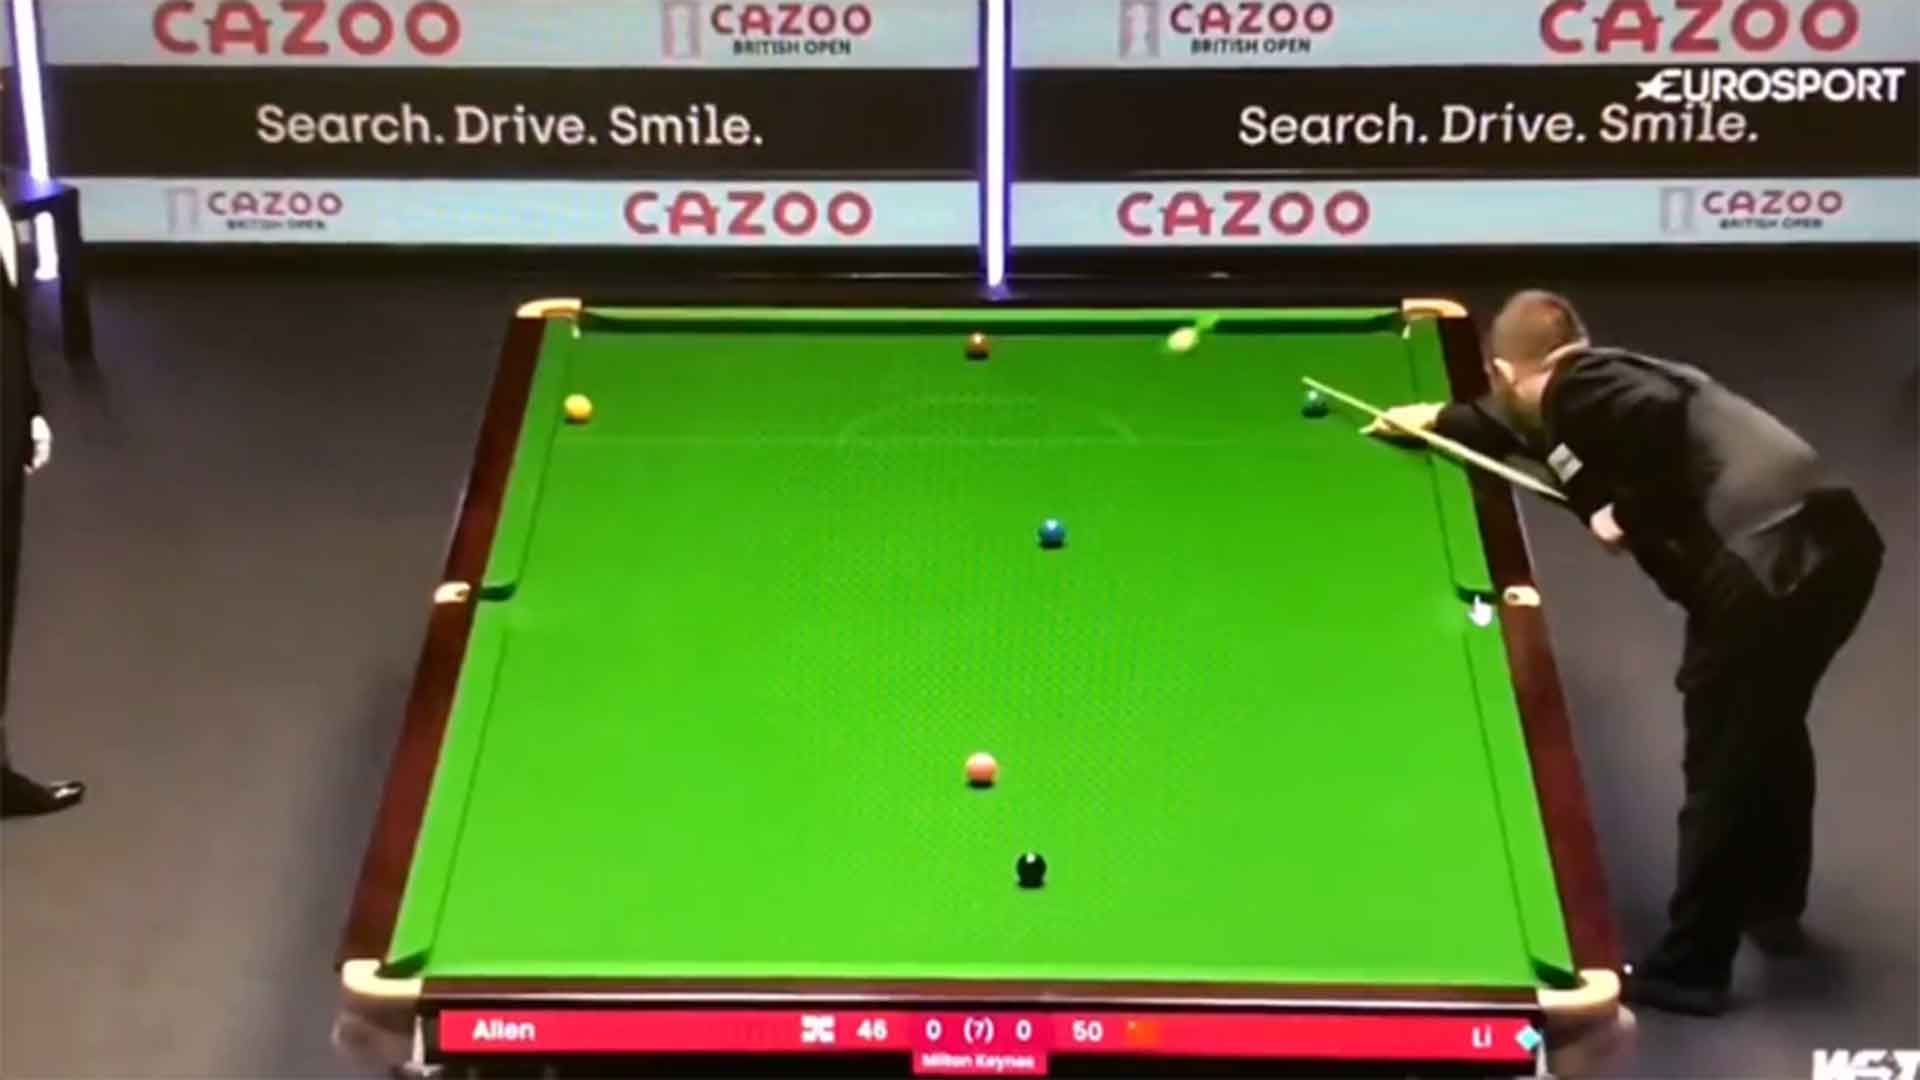 Watch Mark Allens miraculous five-cushion escape at snookers British Open